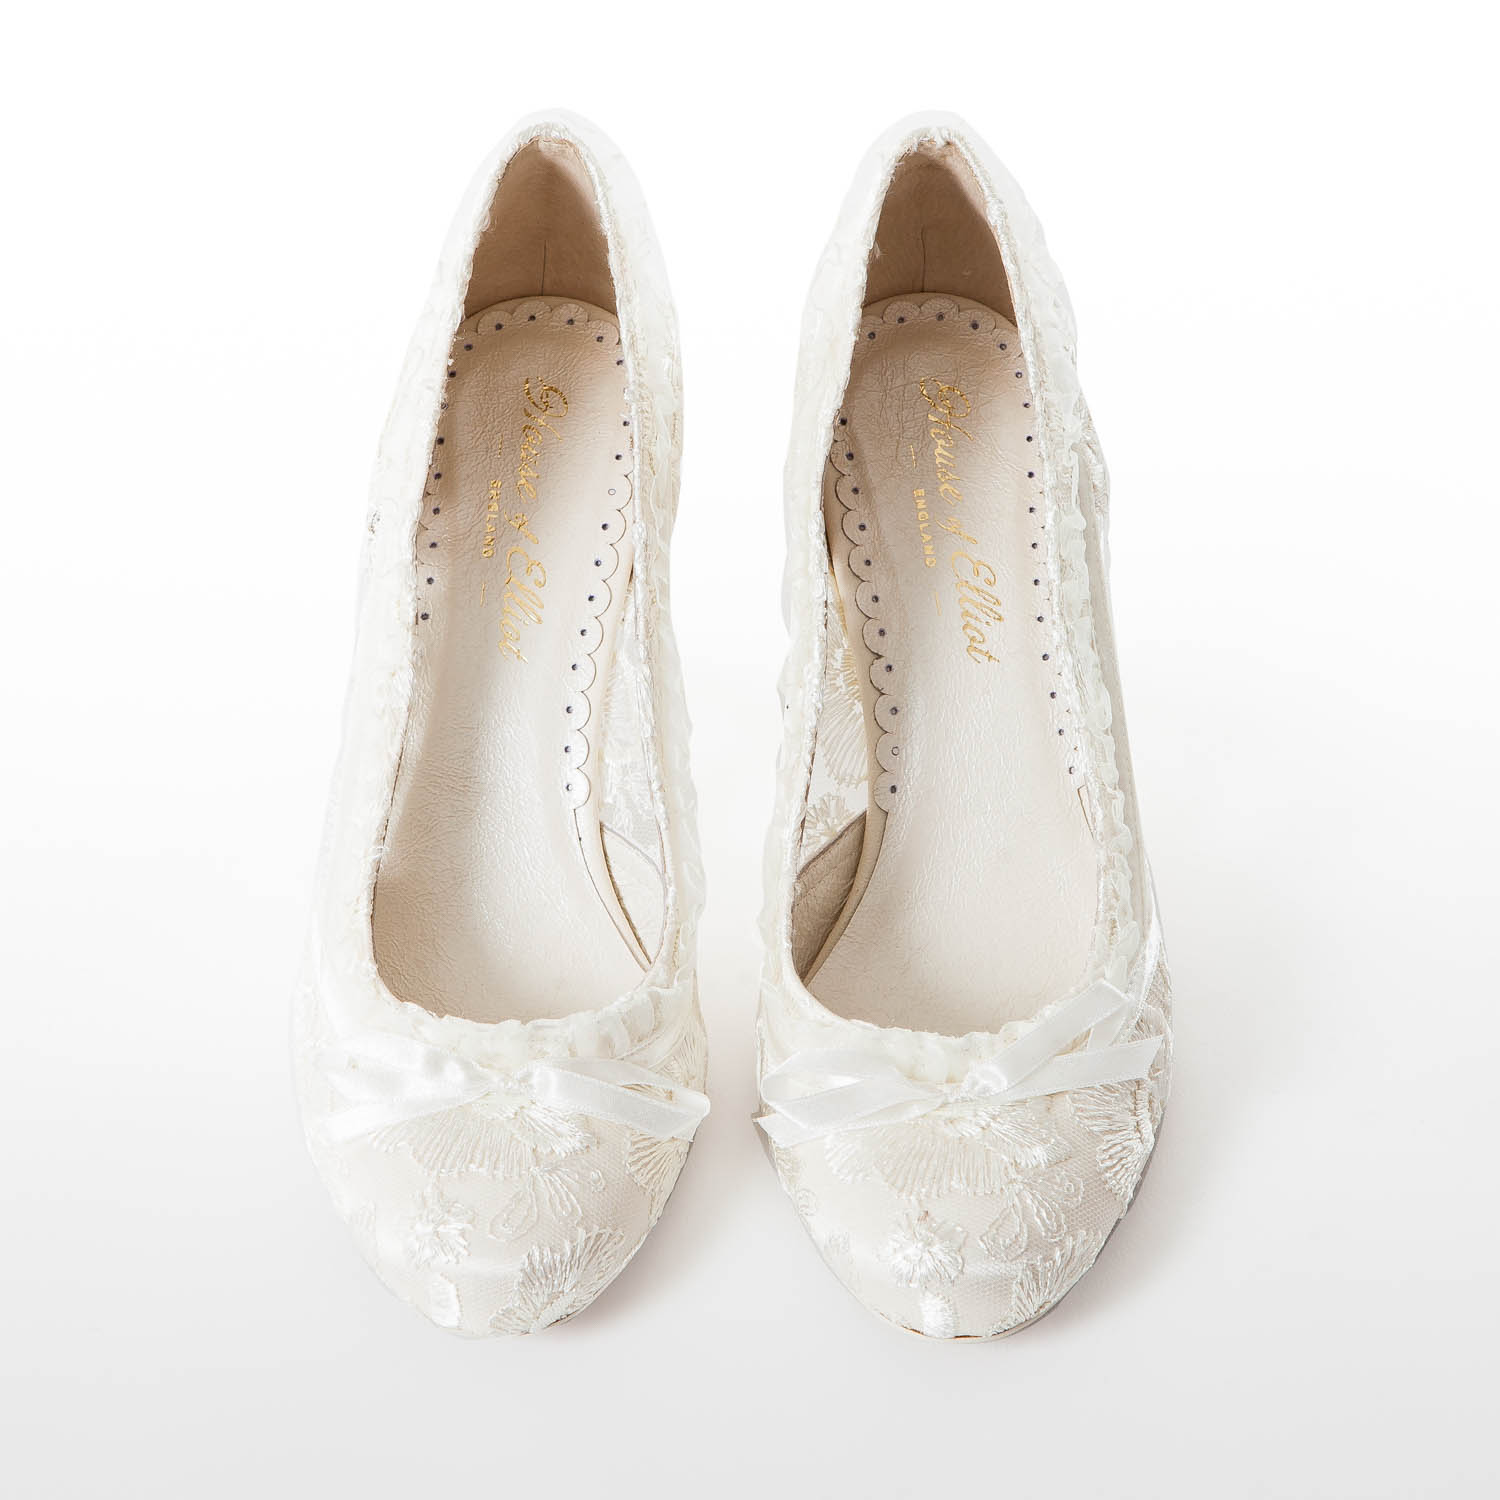 Vintage Ivory Lace Wedding Shoes - Low 